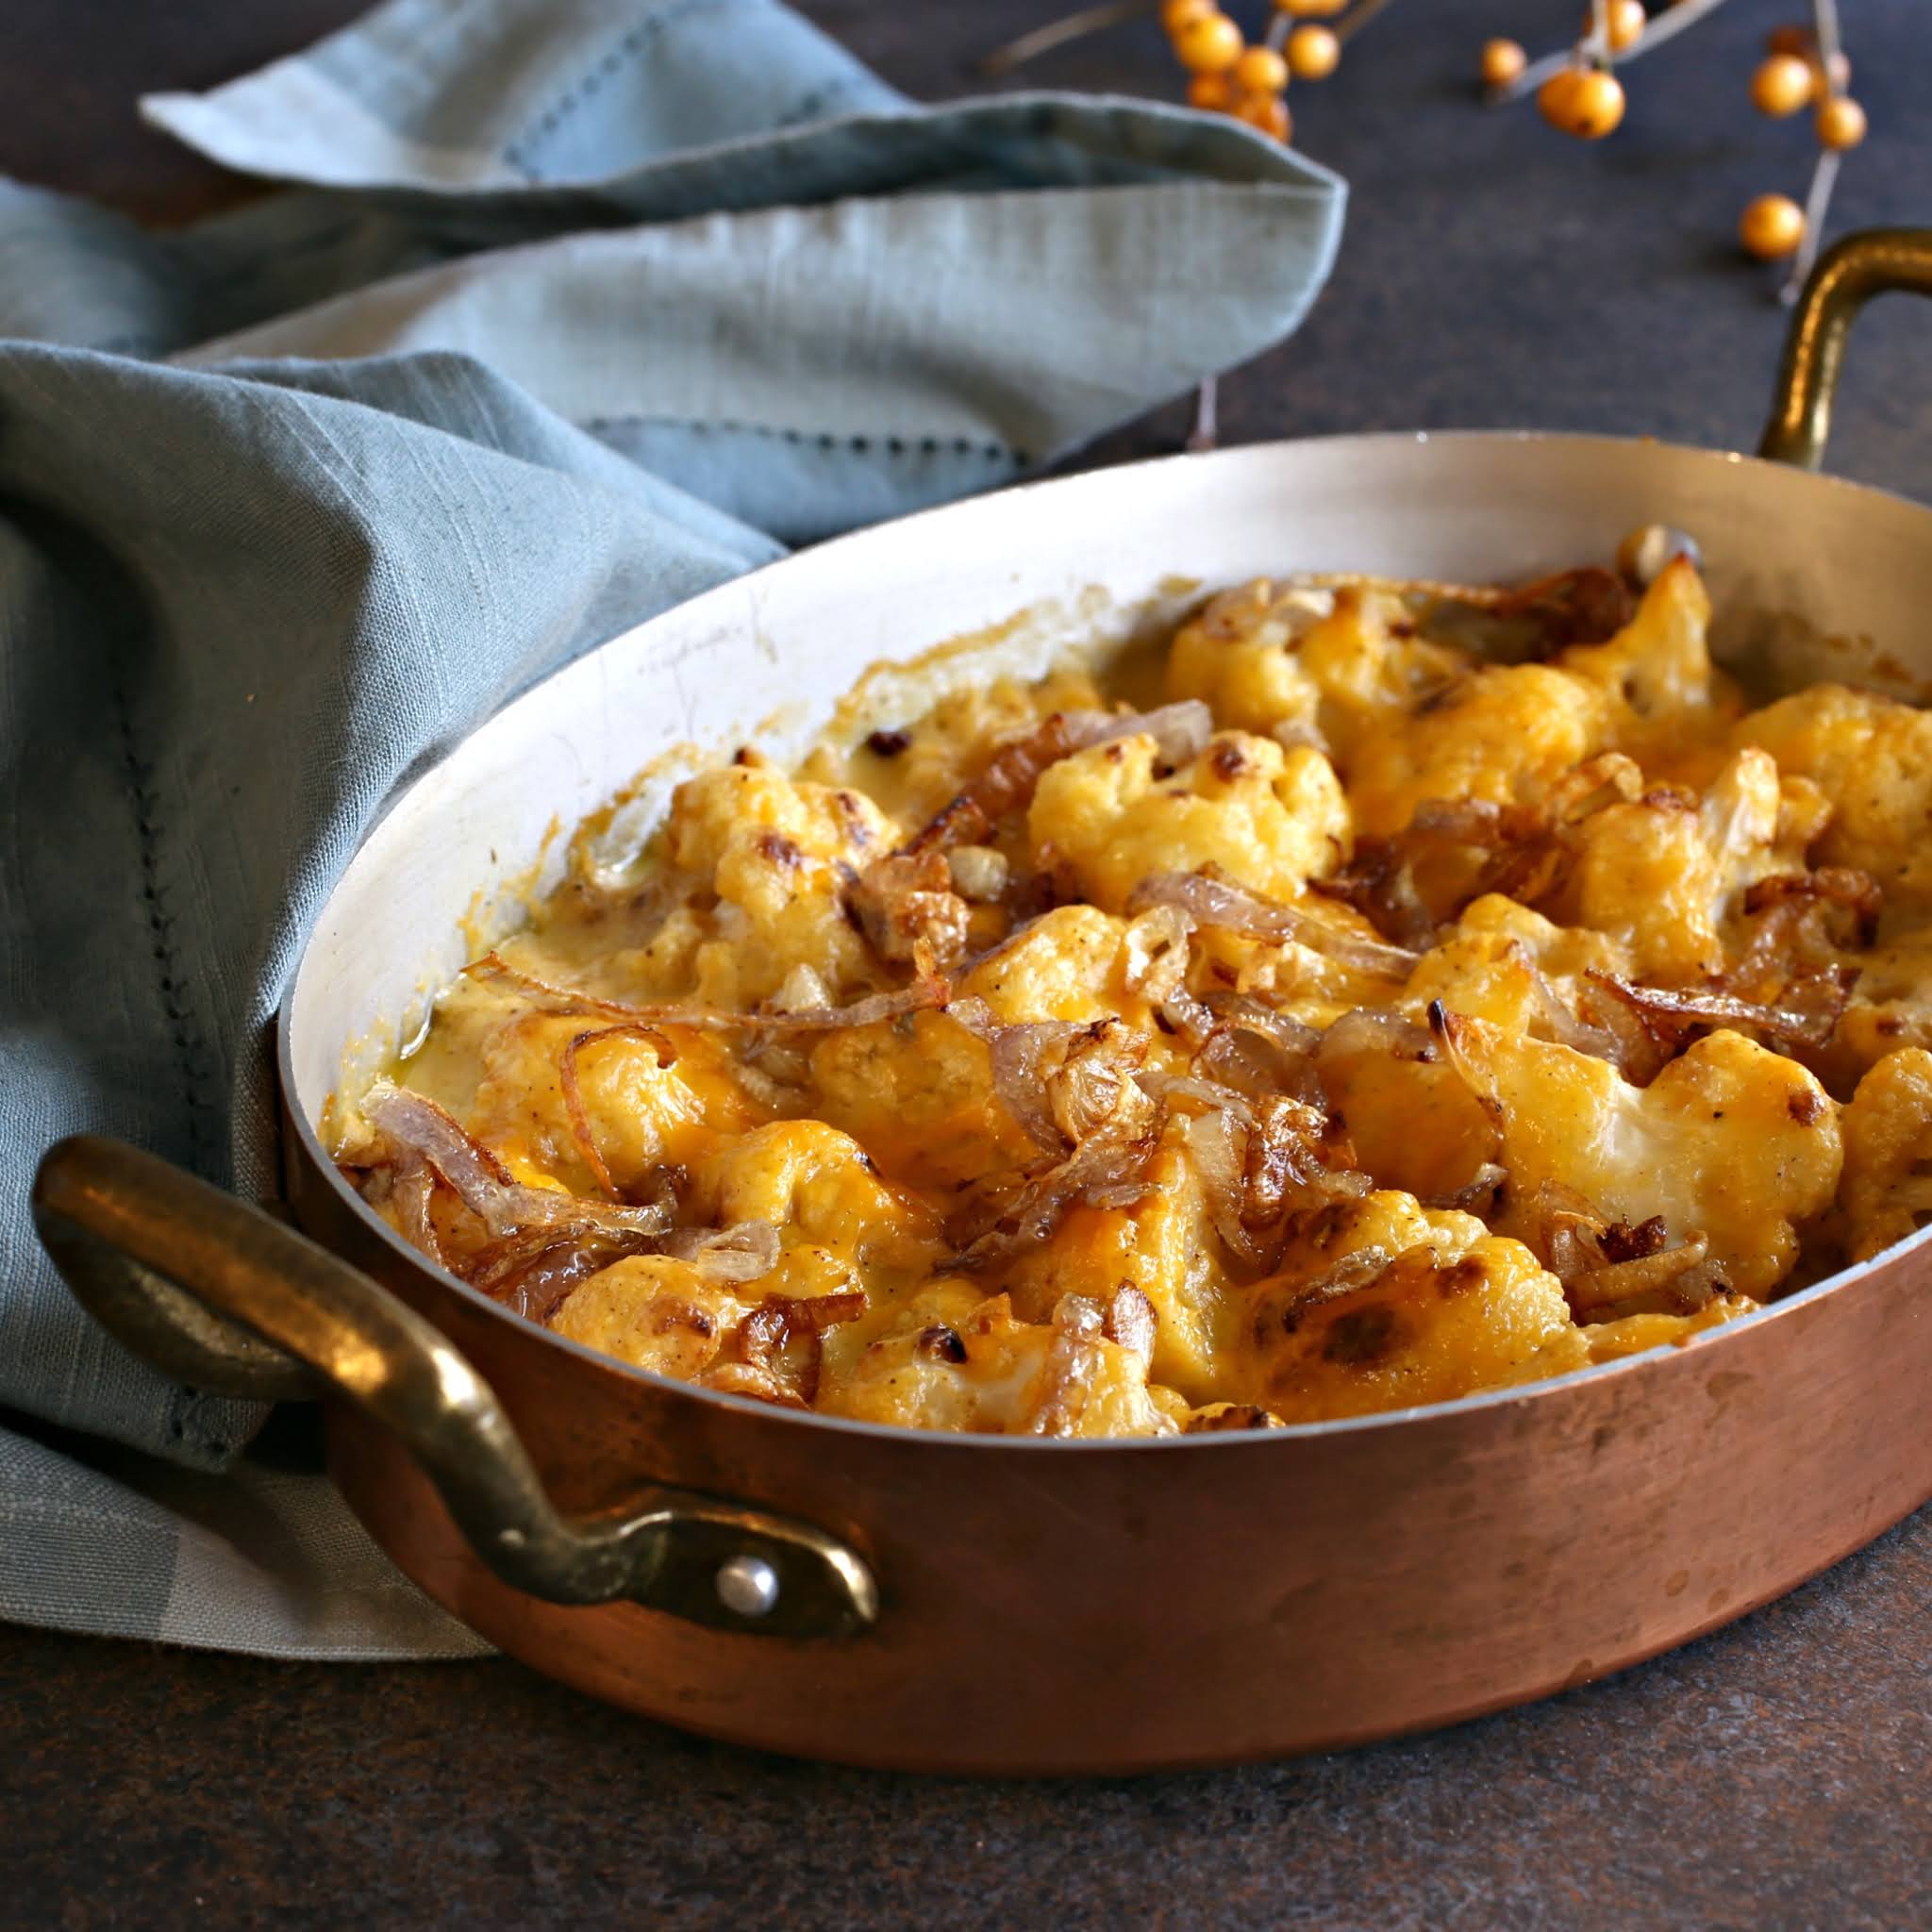 Recipe for a cheddar cheese cauliflower gratin topped with fried shallots.